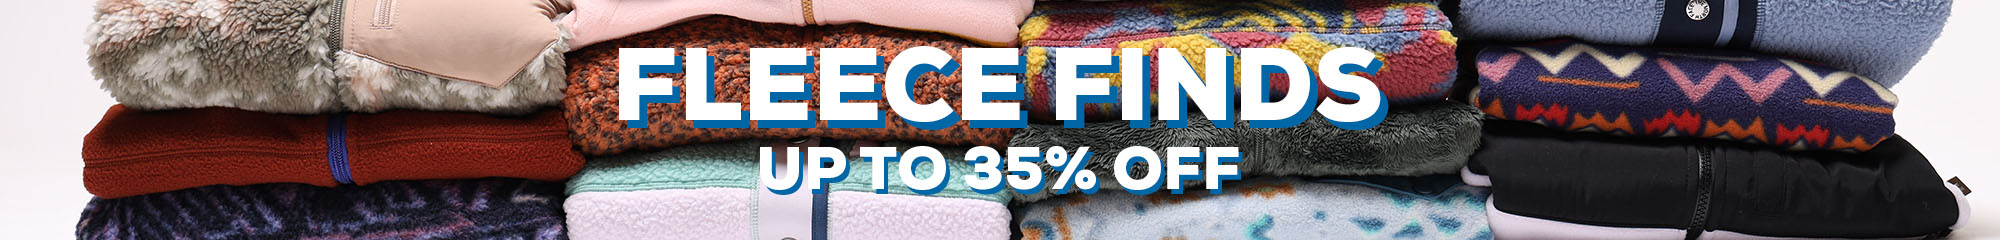 Fleece finds up to 35% Off